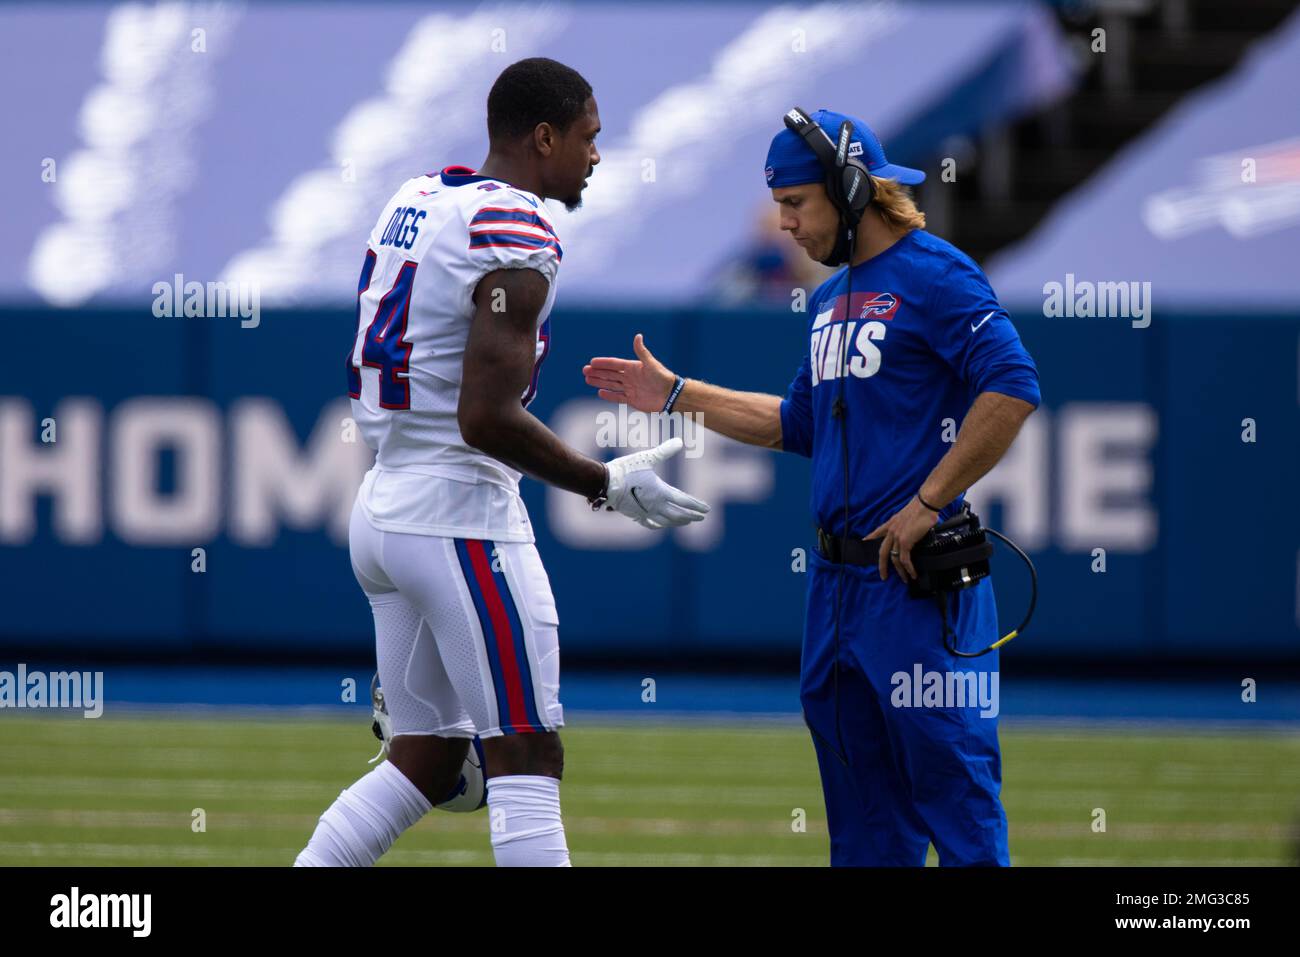 Buffalo Bills wide receiver Stefon Diggs (14) slaps hands with wide  receivers coach Chad Hall during an NFL football game against the New York  Jets, Sunday, Sept. 13, 2020, in Orchard Park,